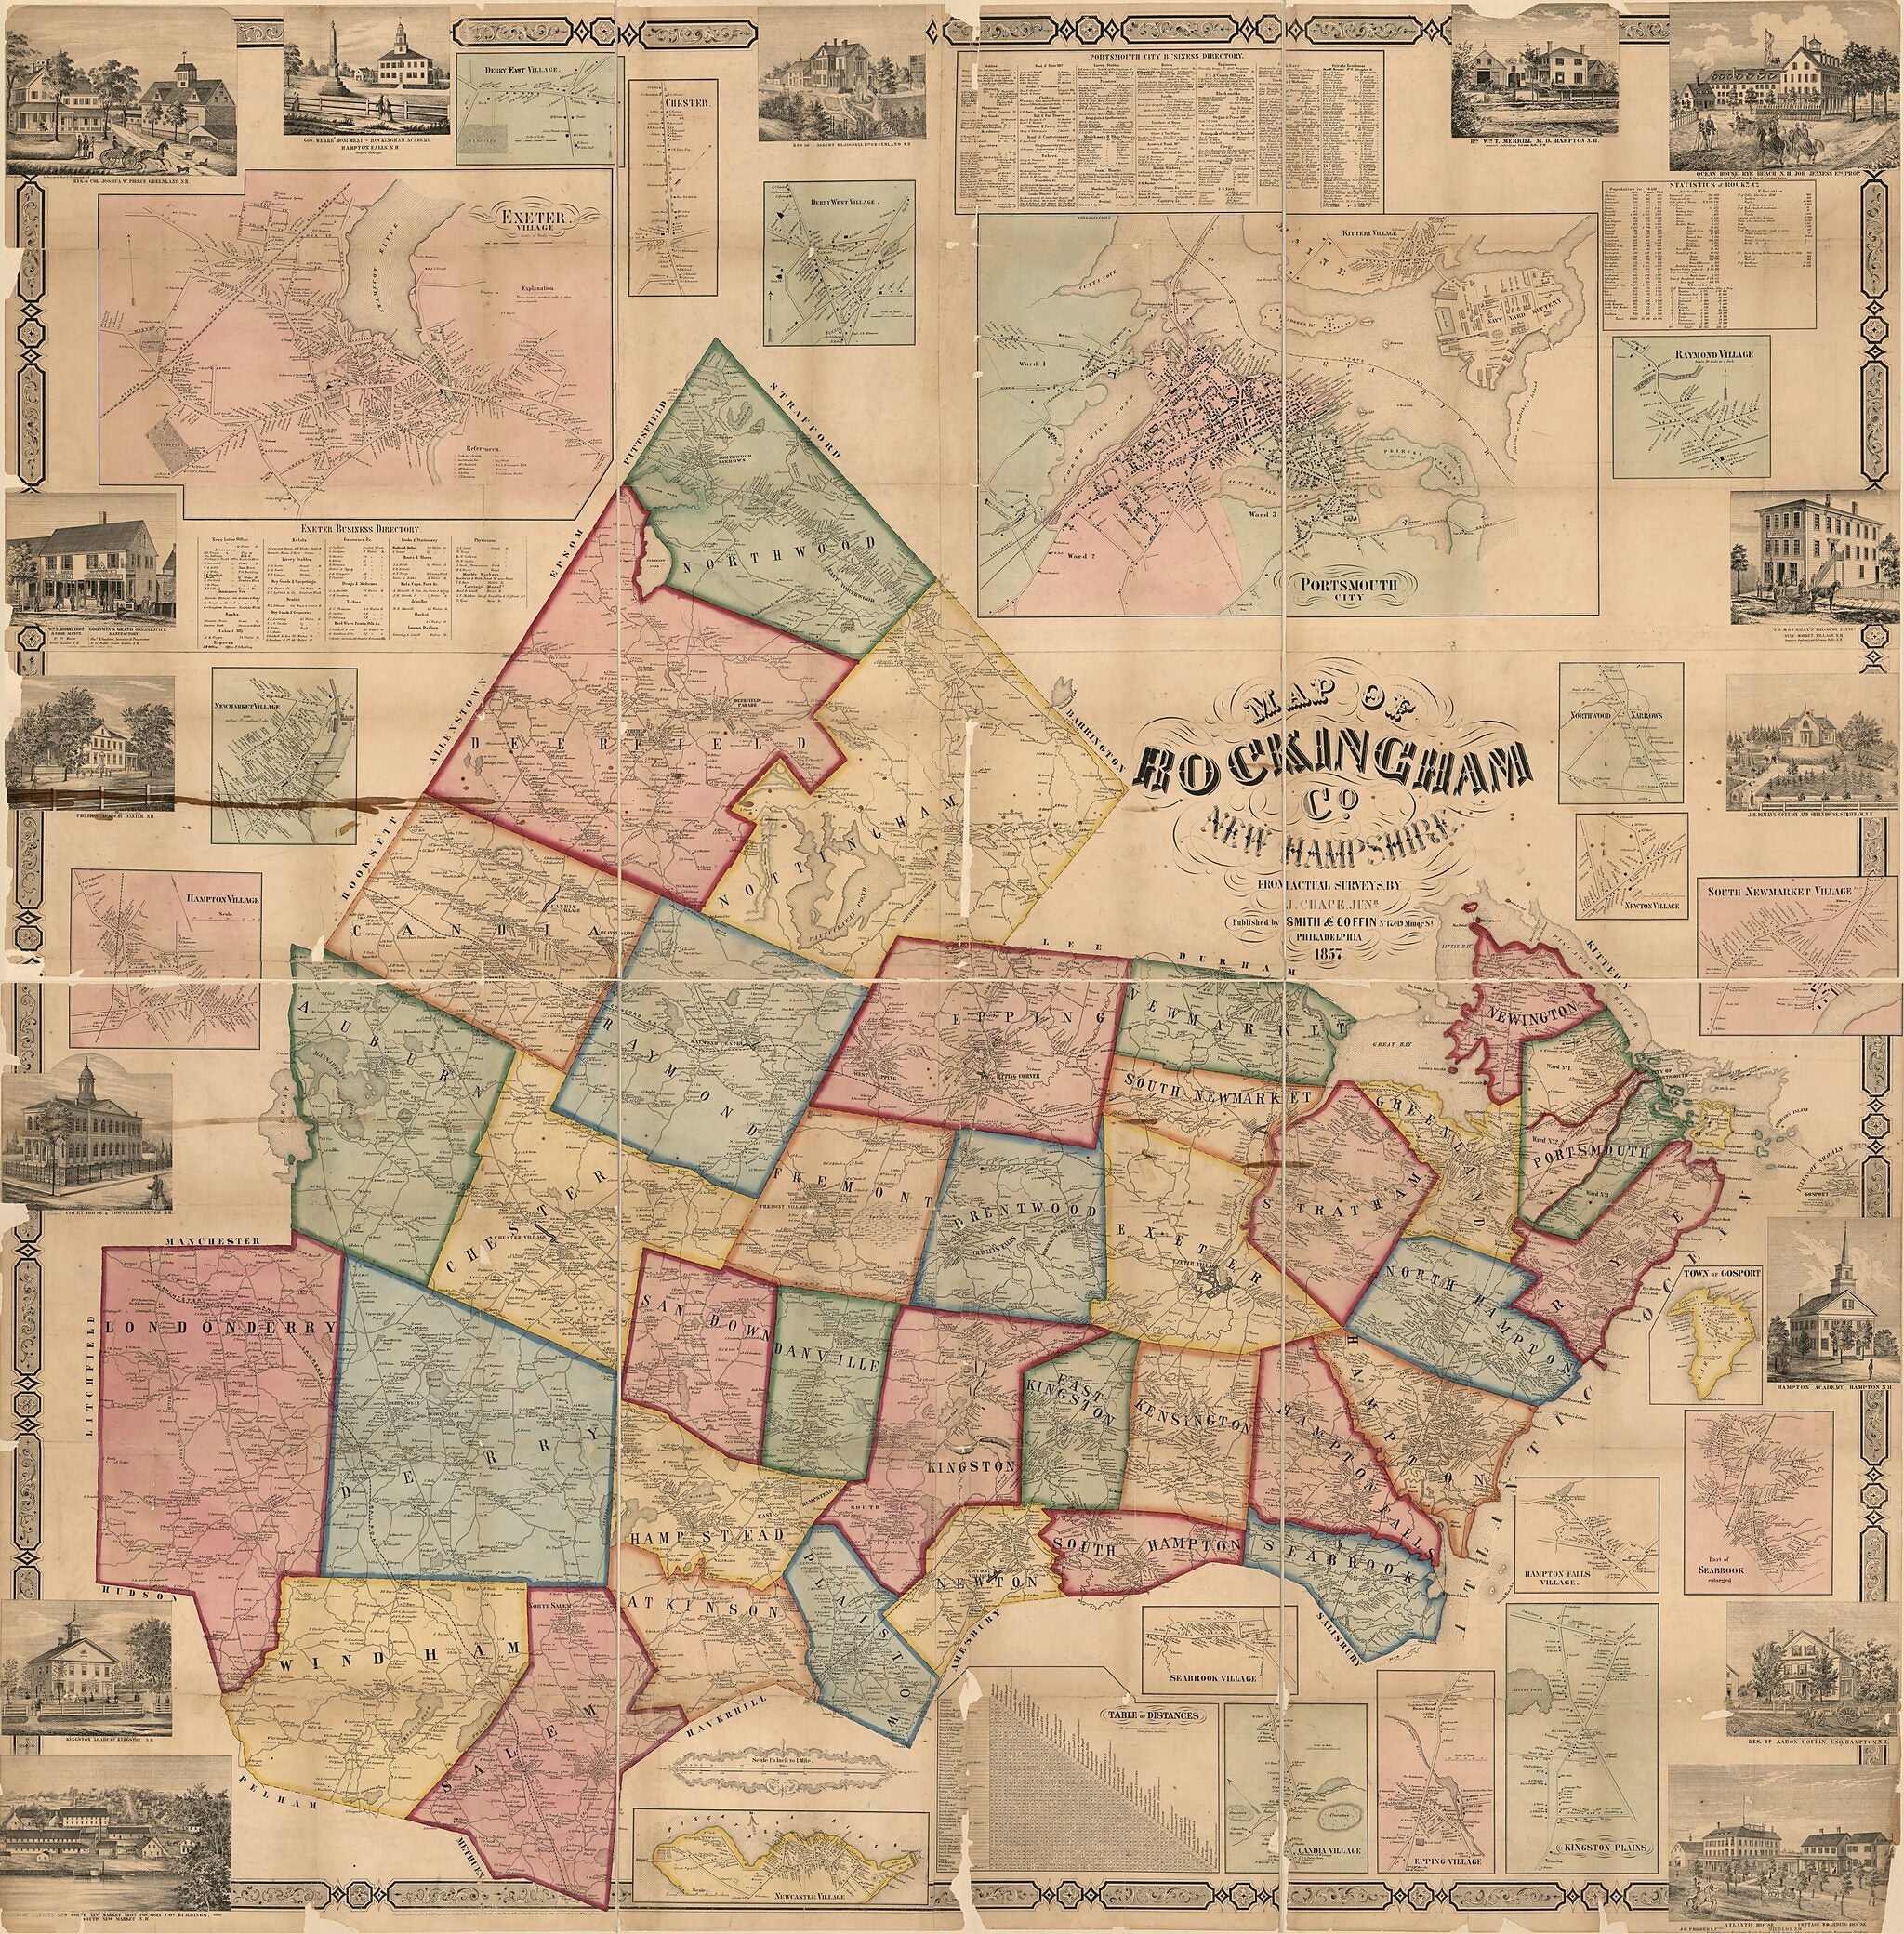 This old map of Map of Rockingham County, New Hampshire (Map of Rockingham County, New Hampshire) from 1857 was created by J. Chace,  Smith &amp; Coffin in 1857